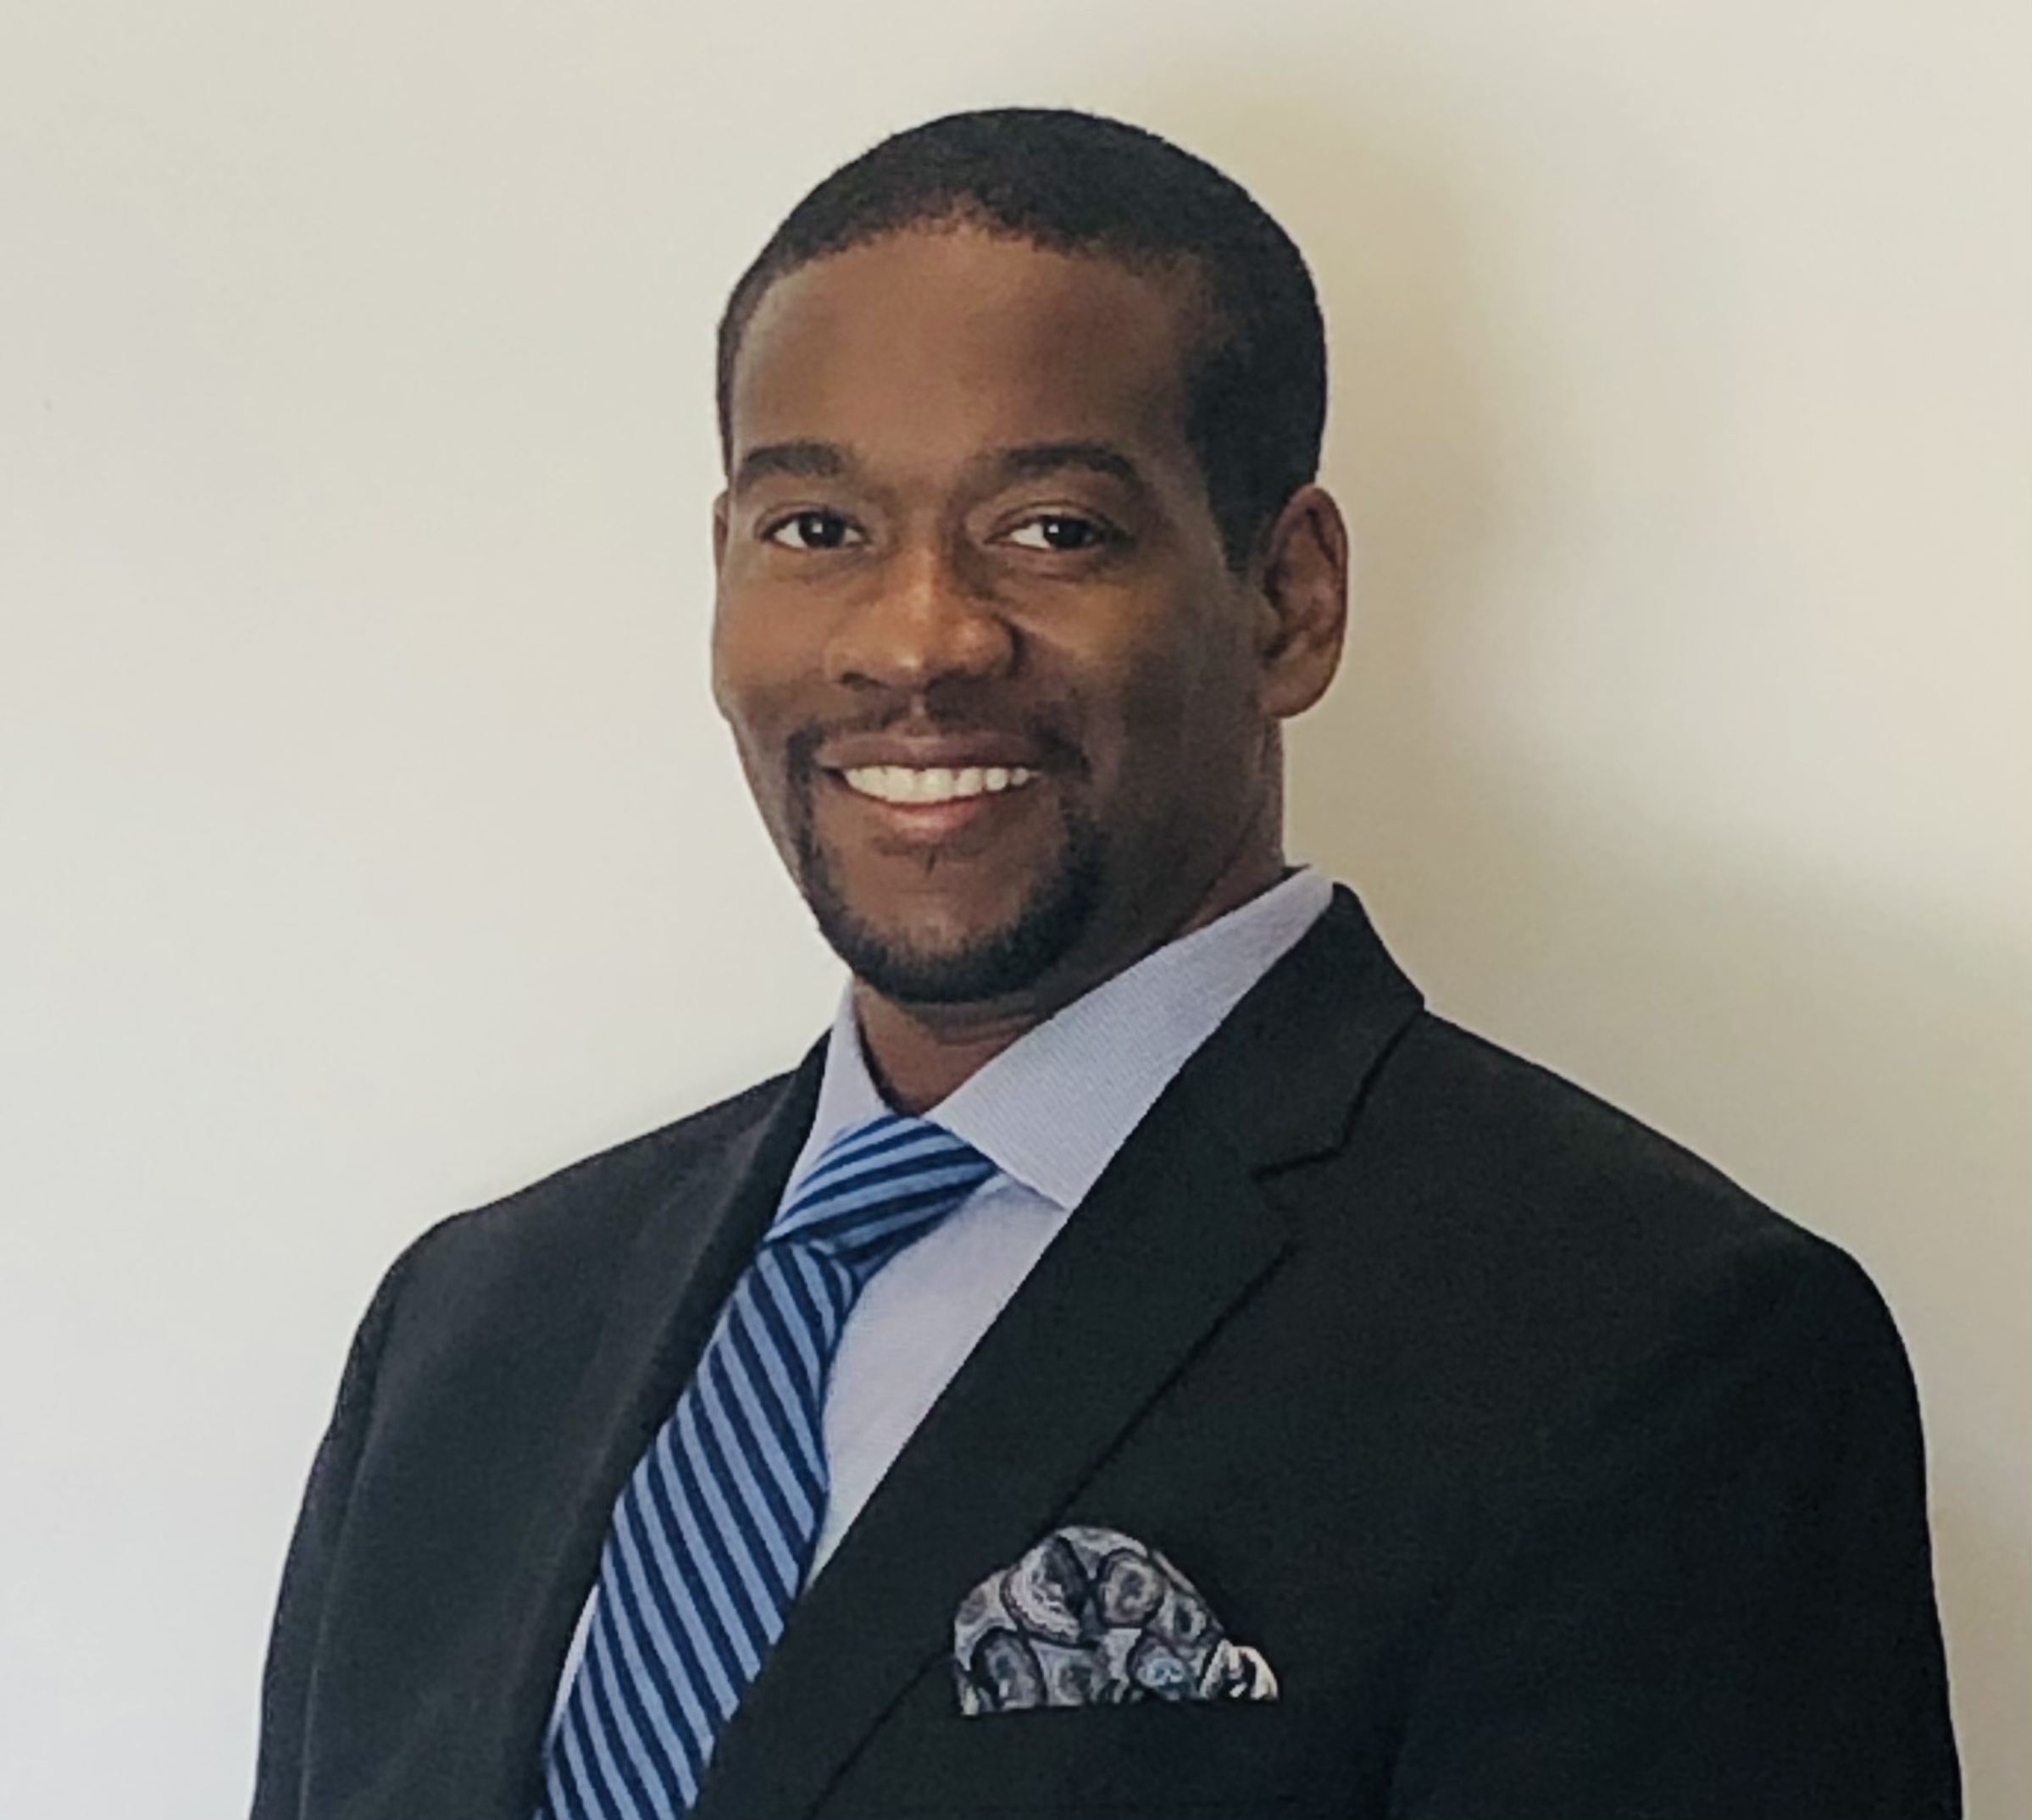 Head shot of smiling Black man in a suit and tie